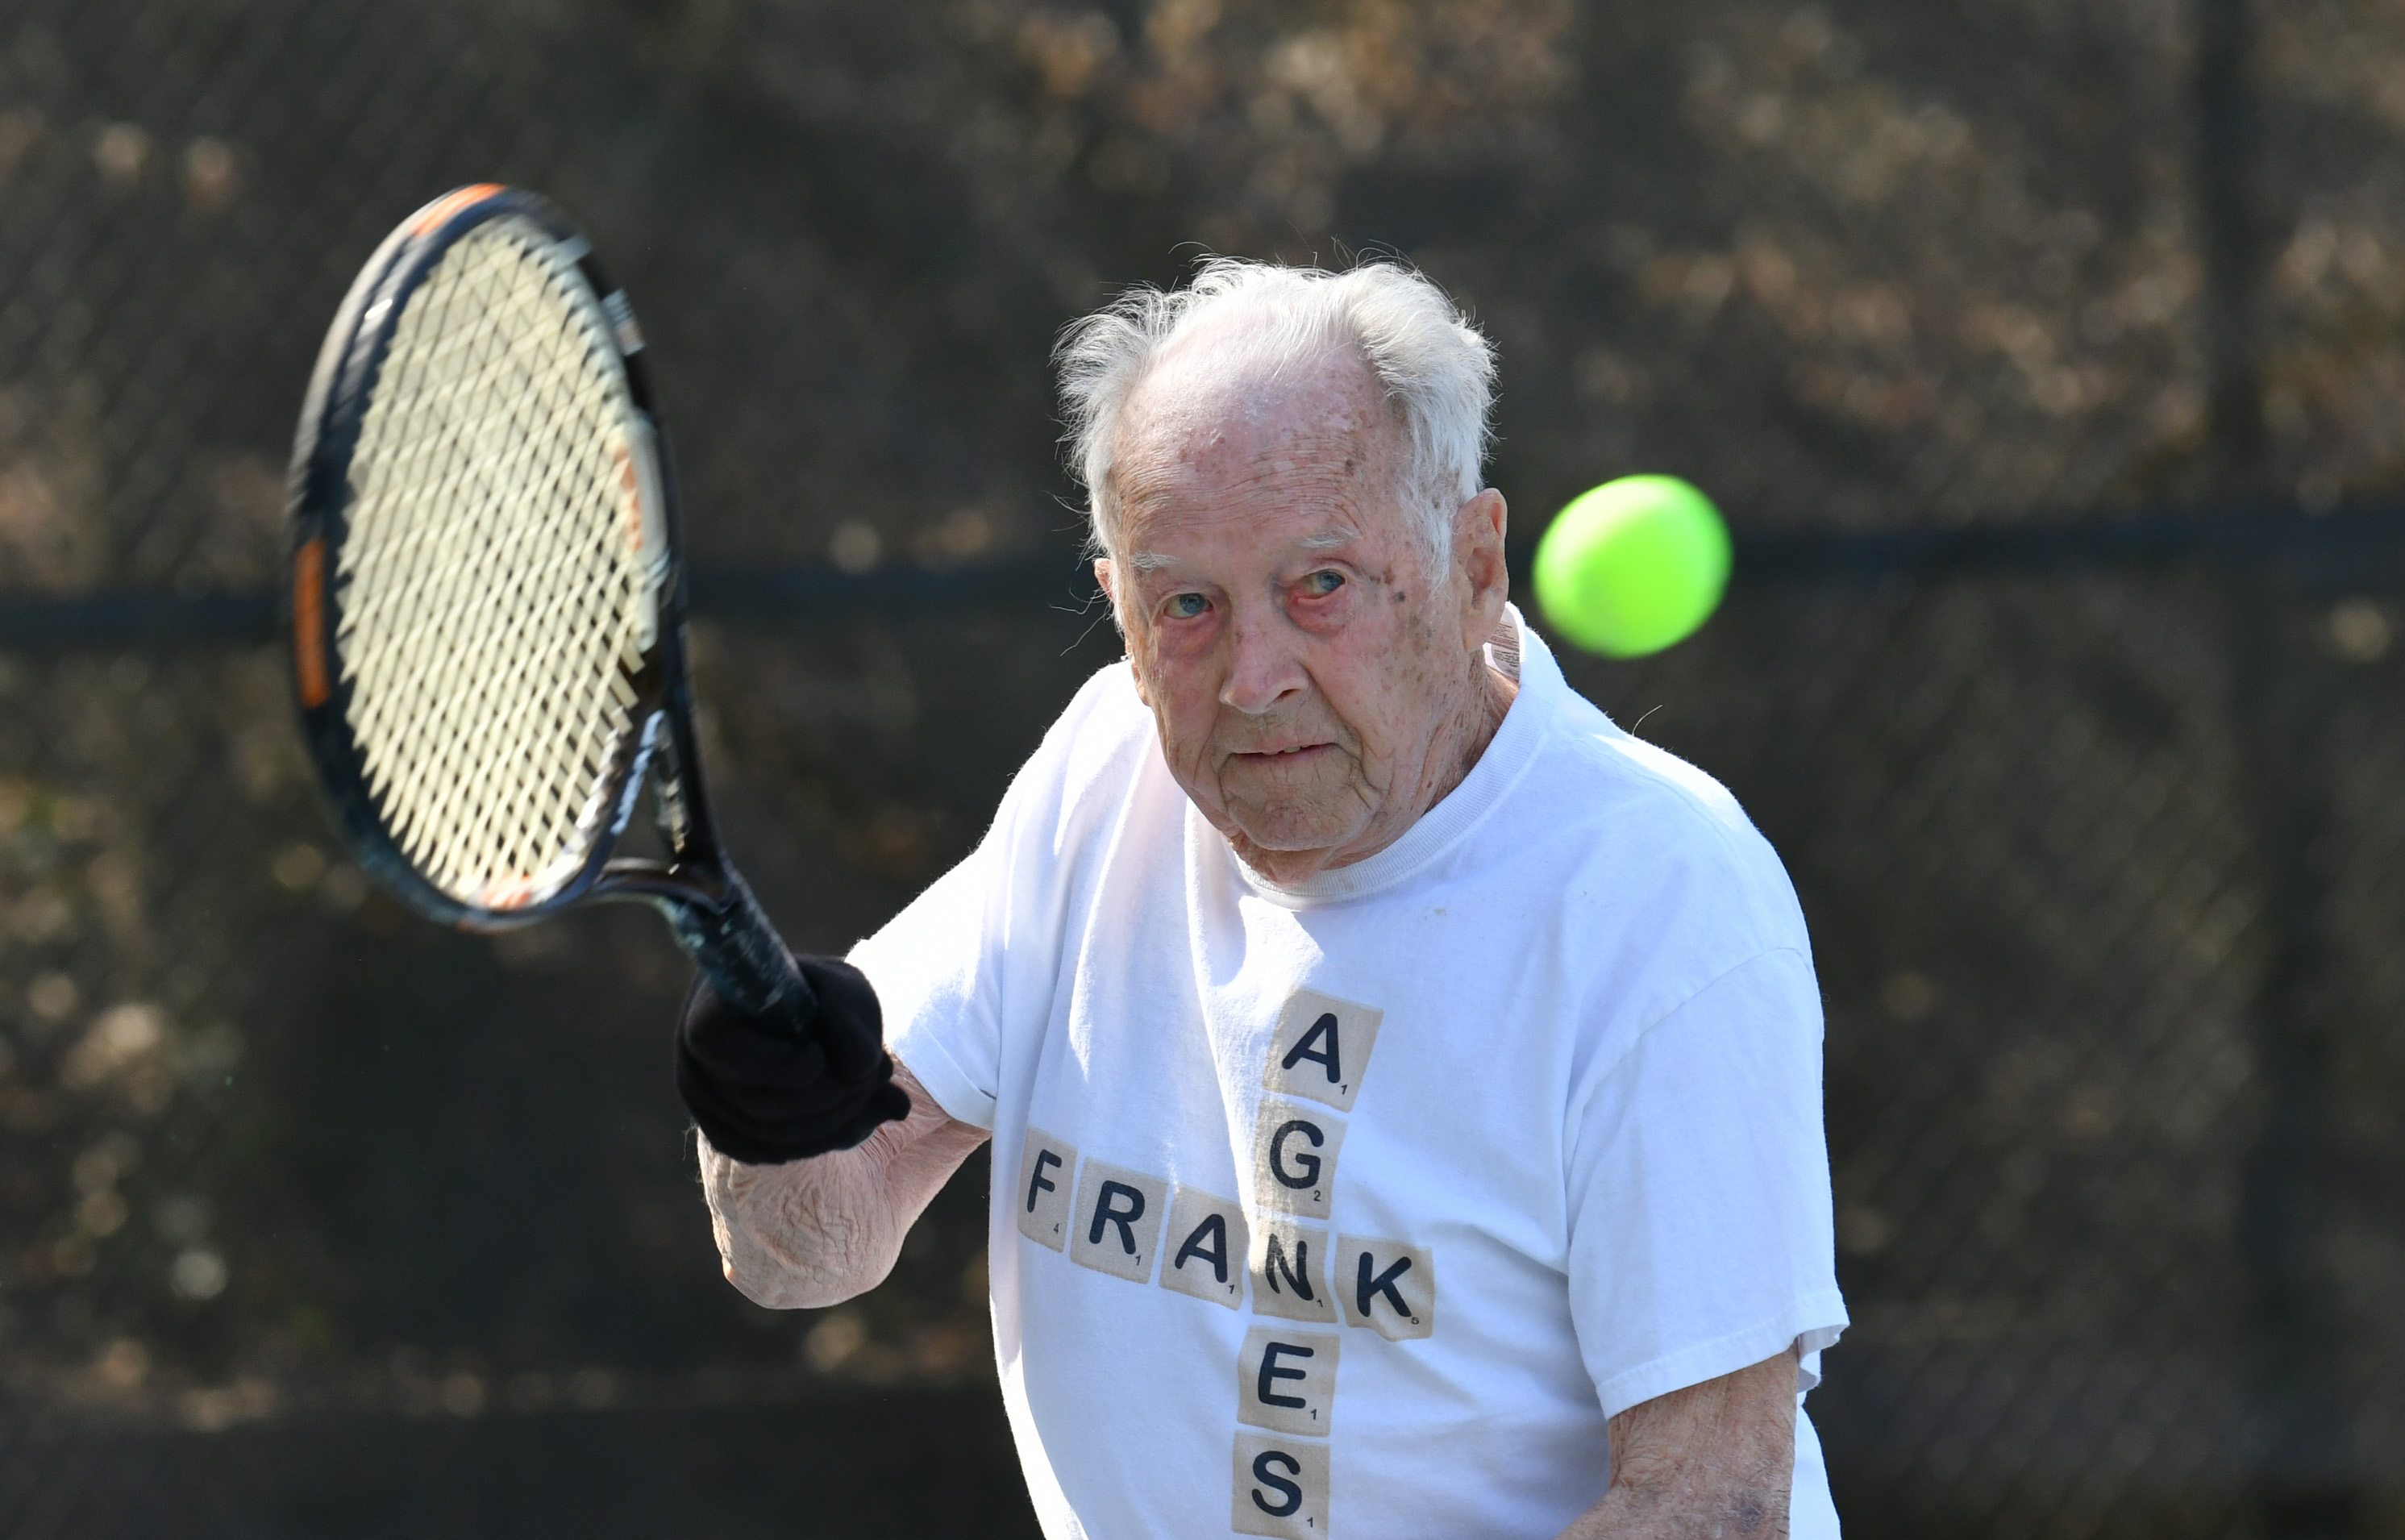 Frank Stovall celebrates his 100th birthday with some singles tennis